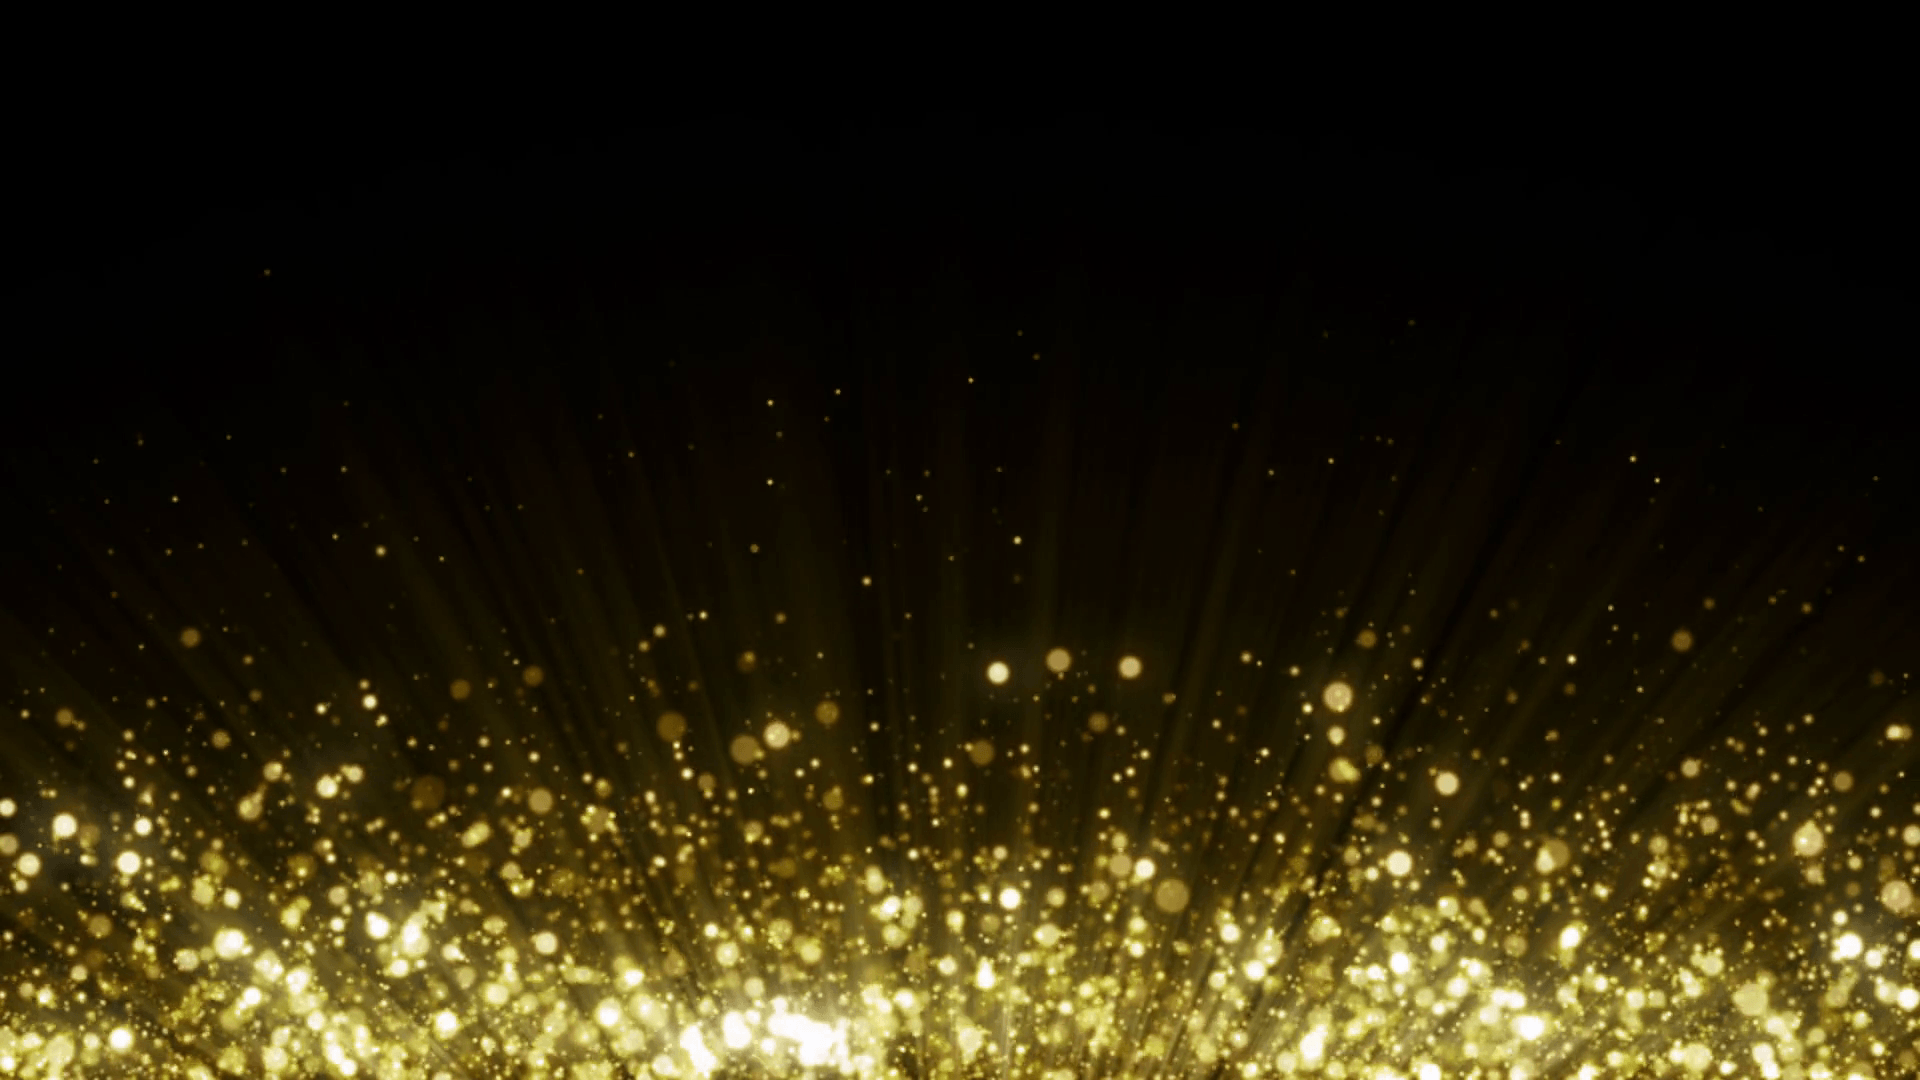 Particles Gold Glitter Bokeh Award Dust Abstract Background Loop 27